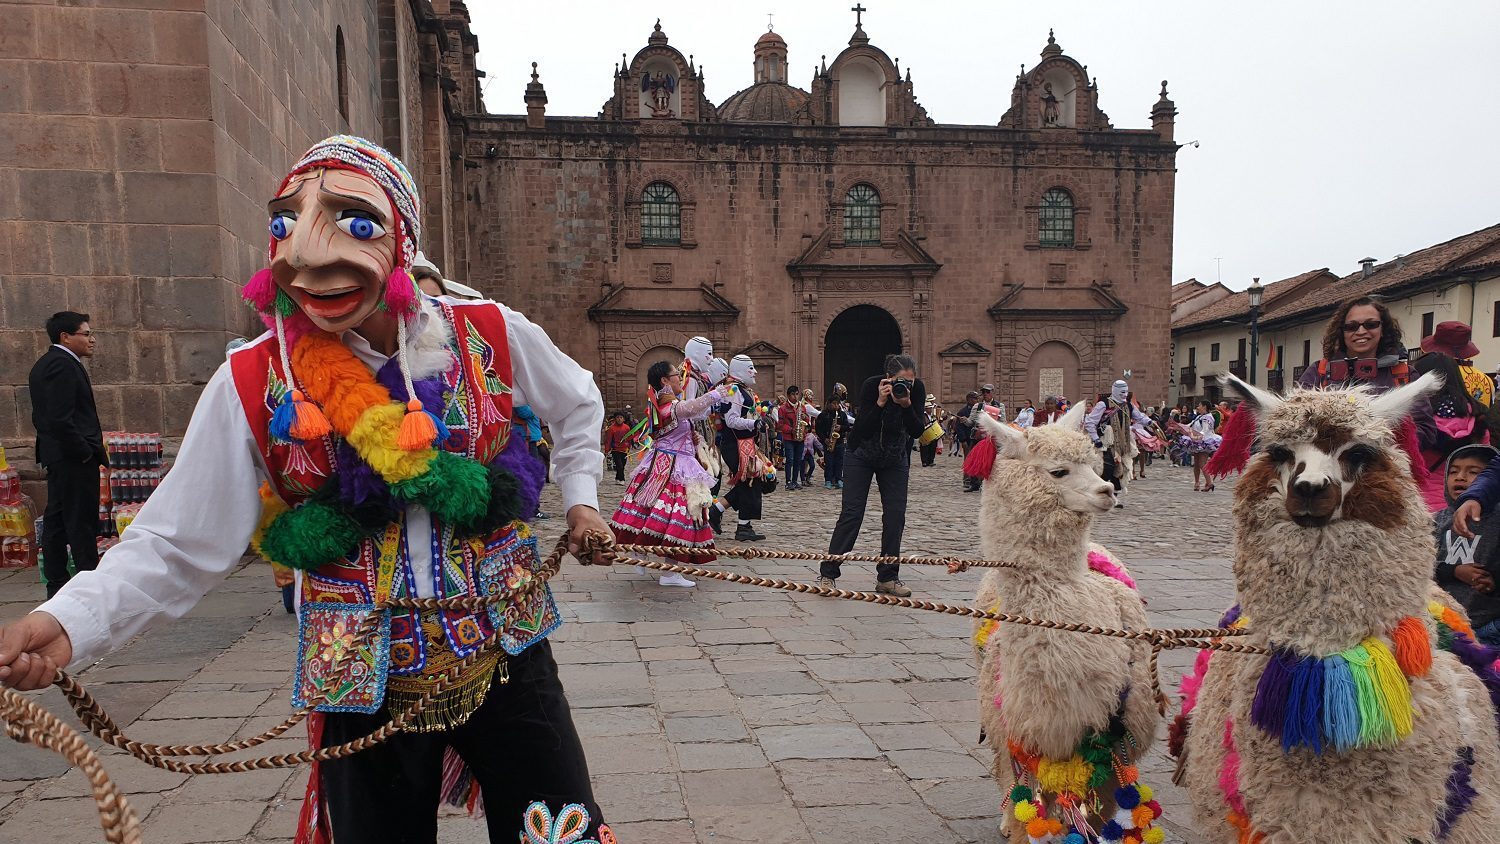 Cusco has many fiestas and local traditions all year long. Visit Cusco with RESPONSible Travel Peru!